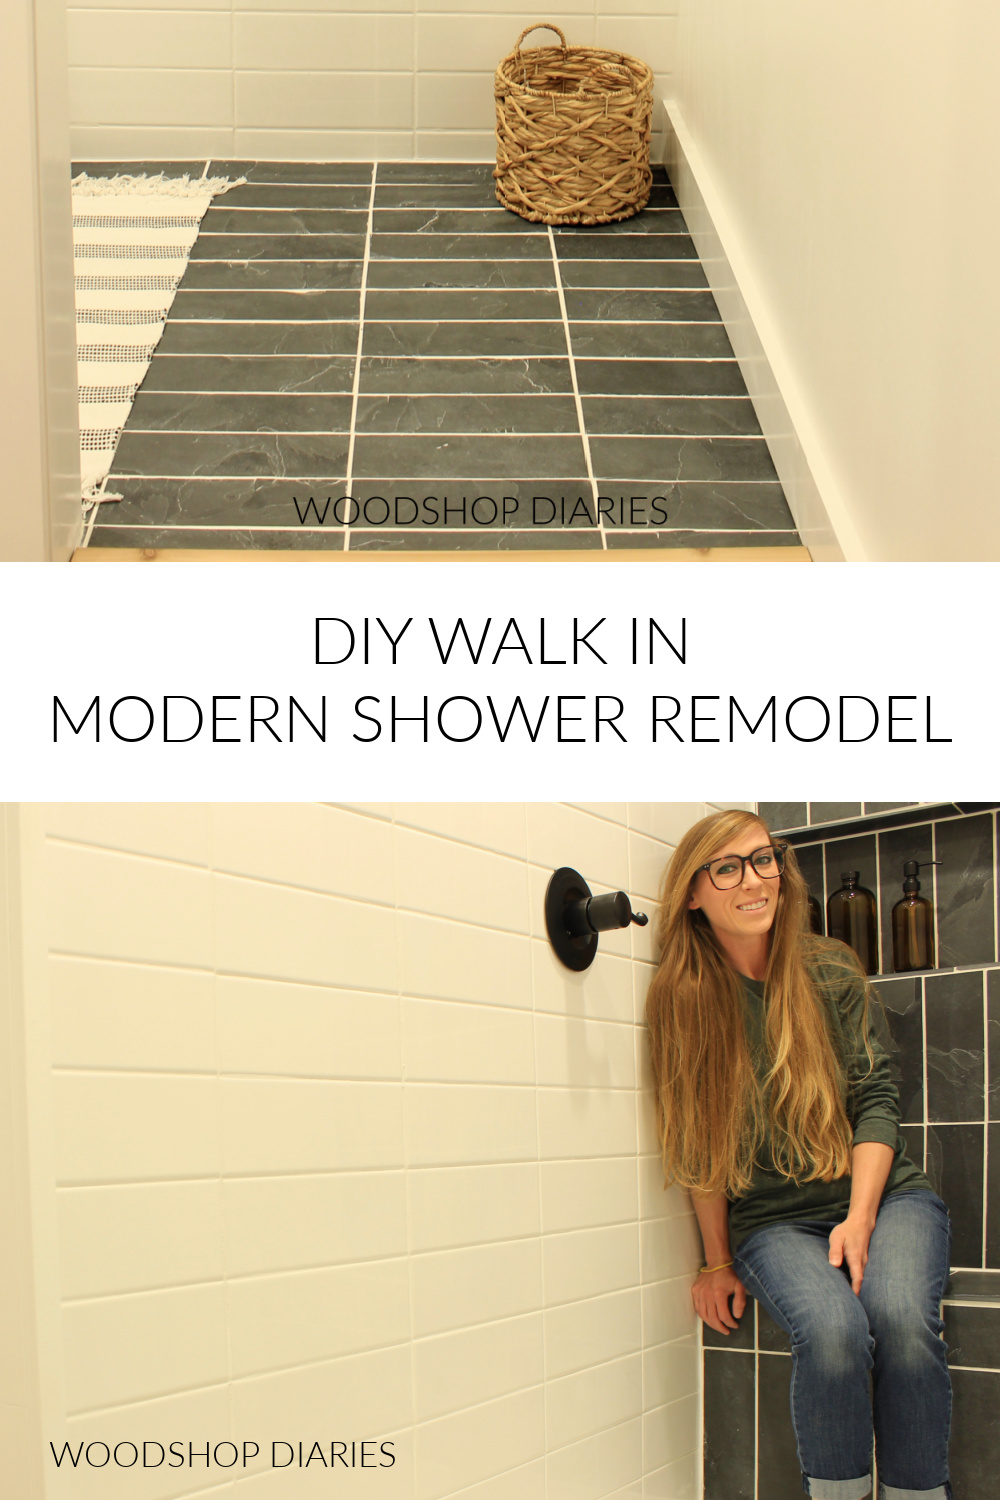 Pinterest collage image showing shower remodeled entrance at top and Shara sitting on shower bench seat at bottom with text "DIY walk in modern shower remodel"